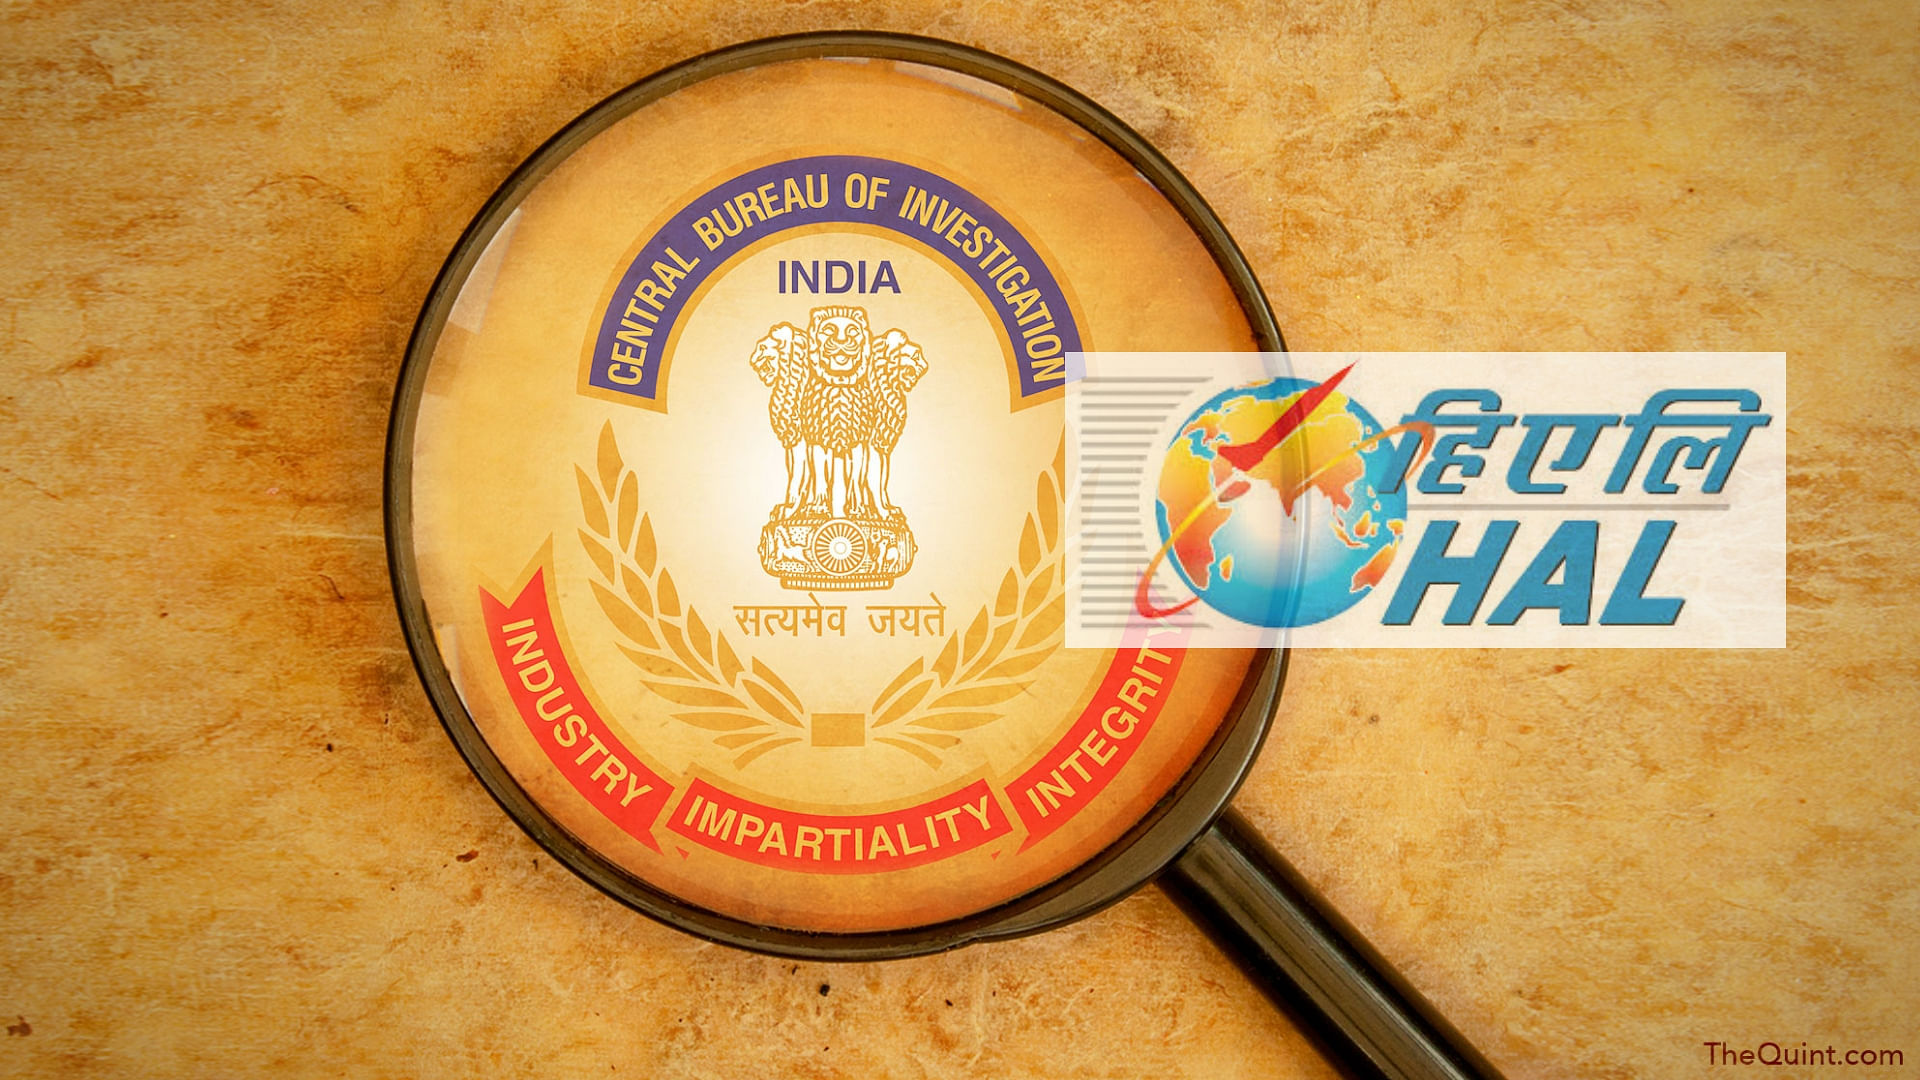 A case has been registered against eight officials of Hindustan Aeronautics Ltd (HAL) on account of corruption charges.